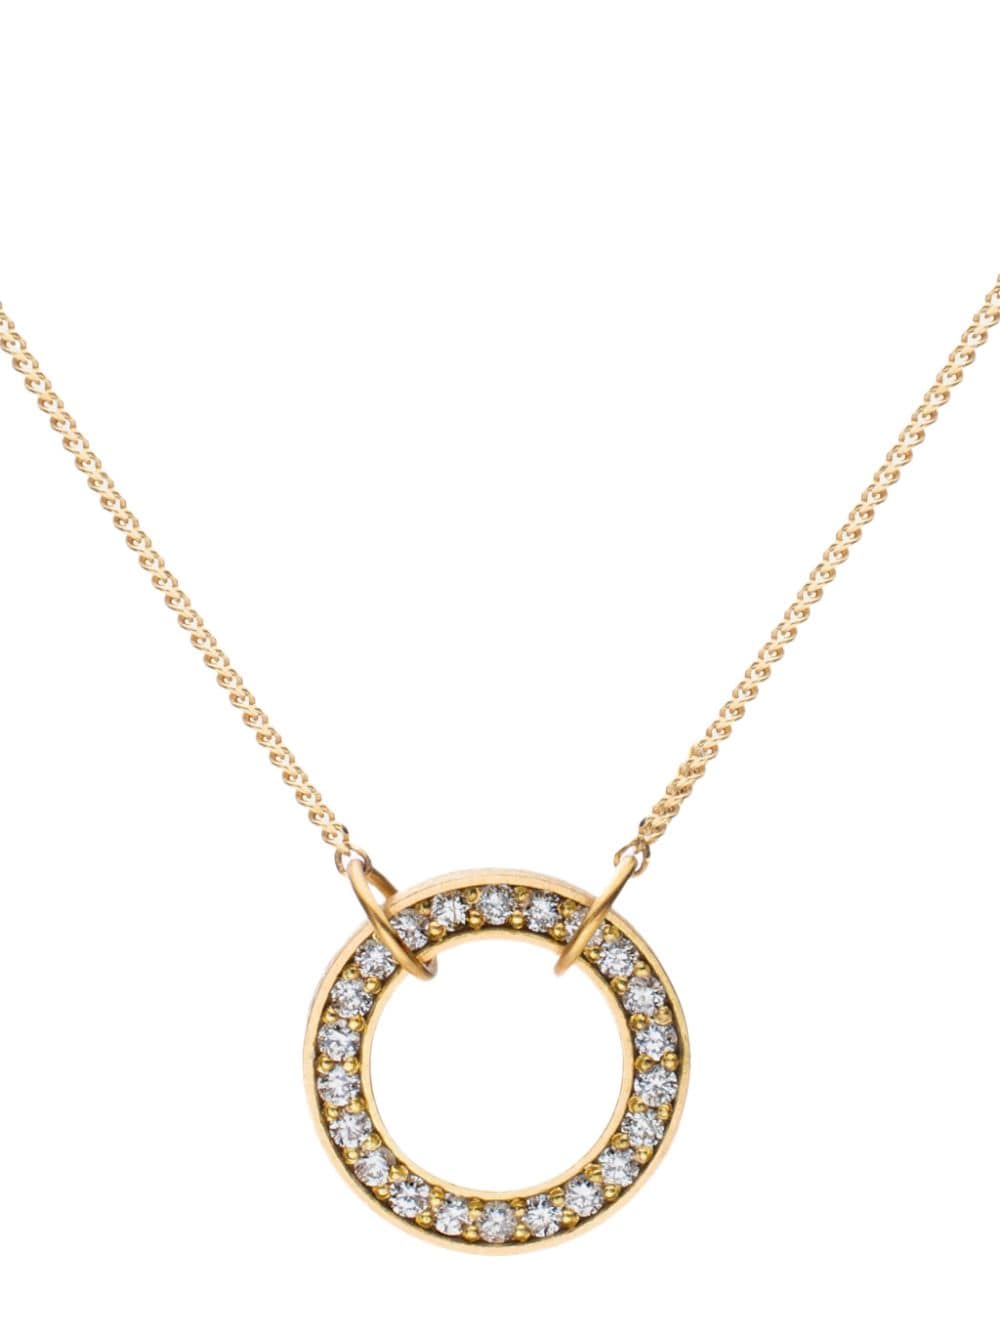 18kt yellow gold Composizione diamond necklace